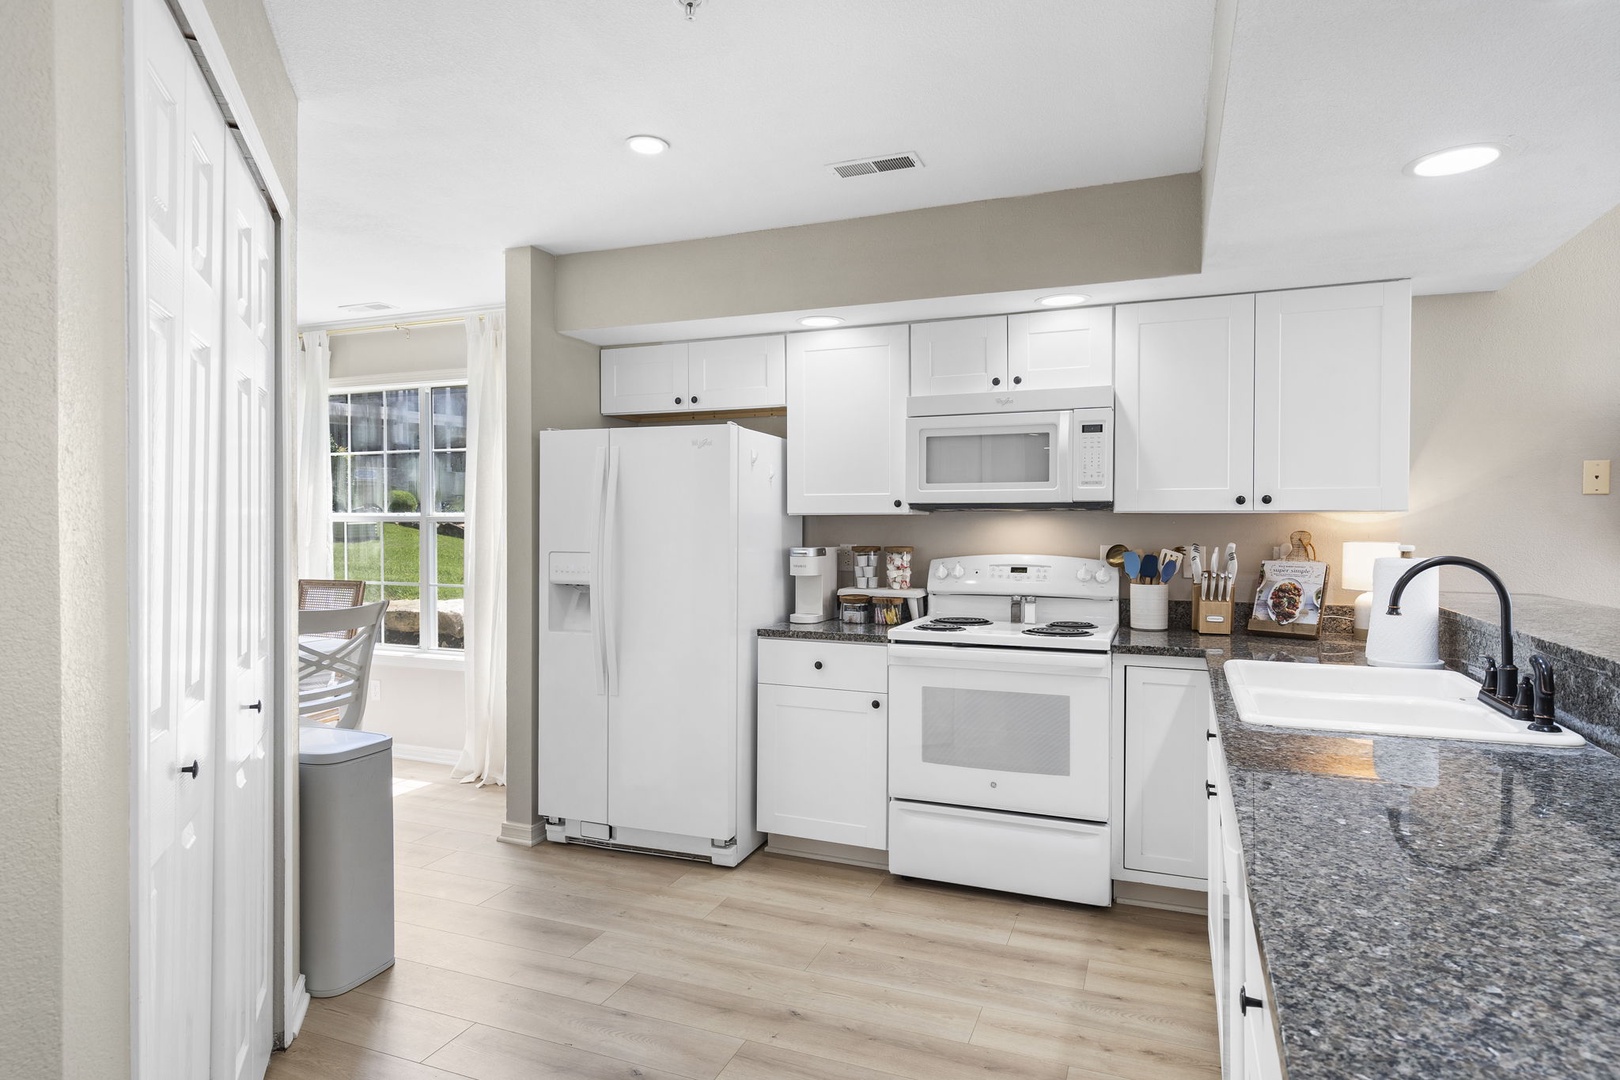 The open, well-equipped kitchen offers plenty of storage & counter space